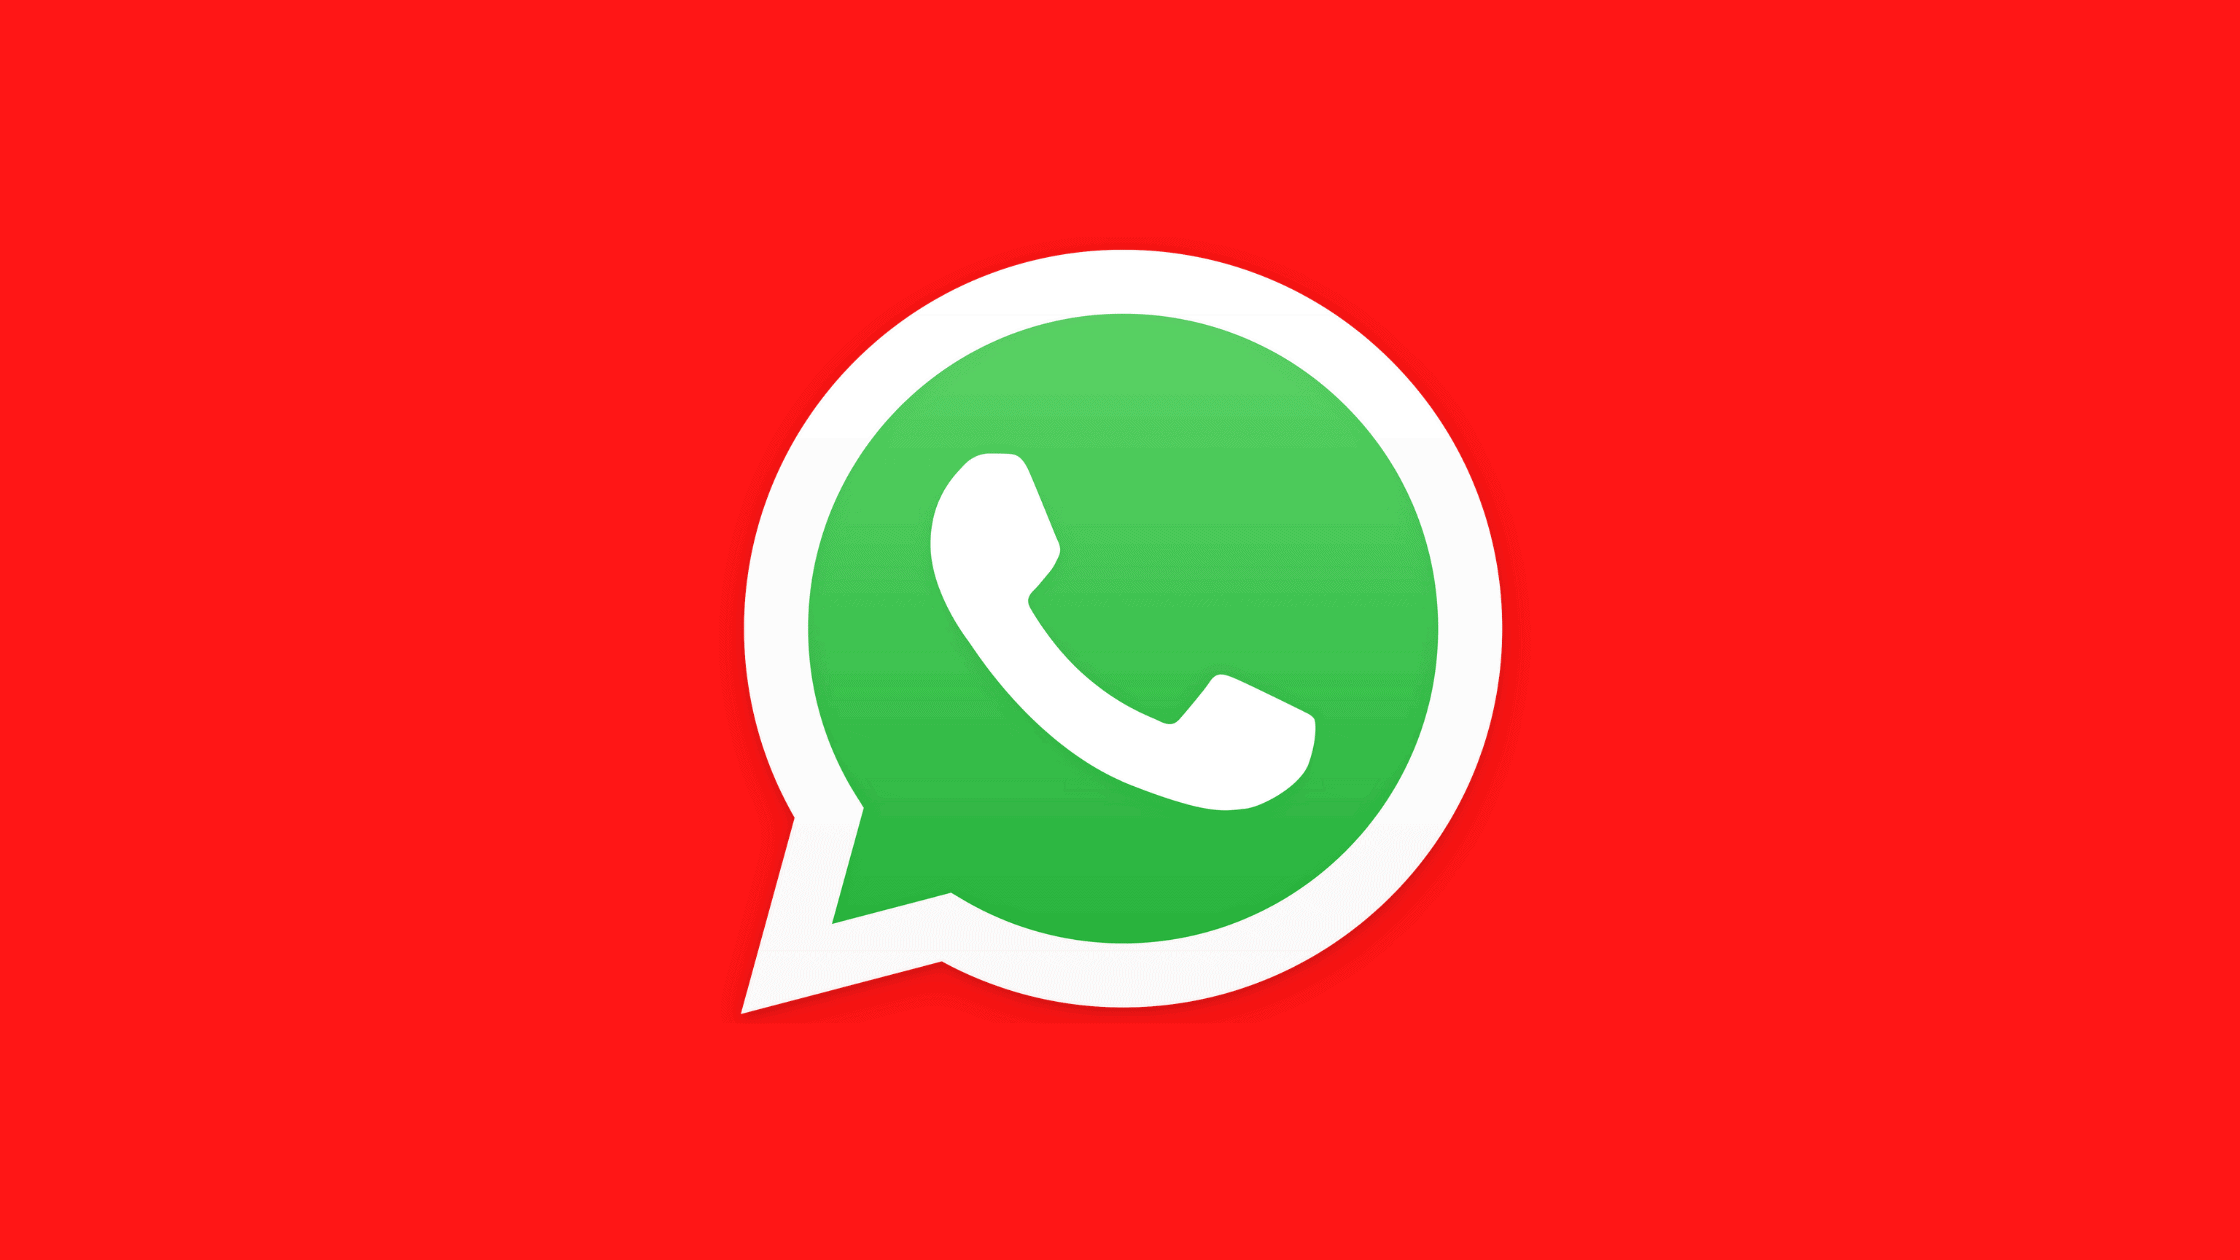 How To Patch These Two Rce Vulnerabilities In Whatsapp